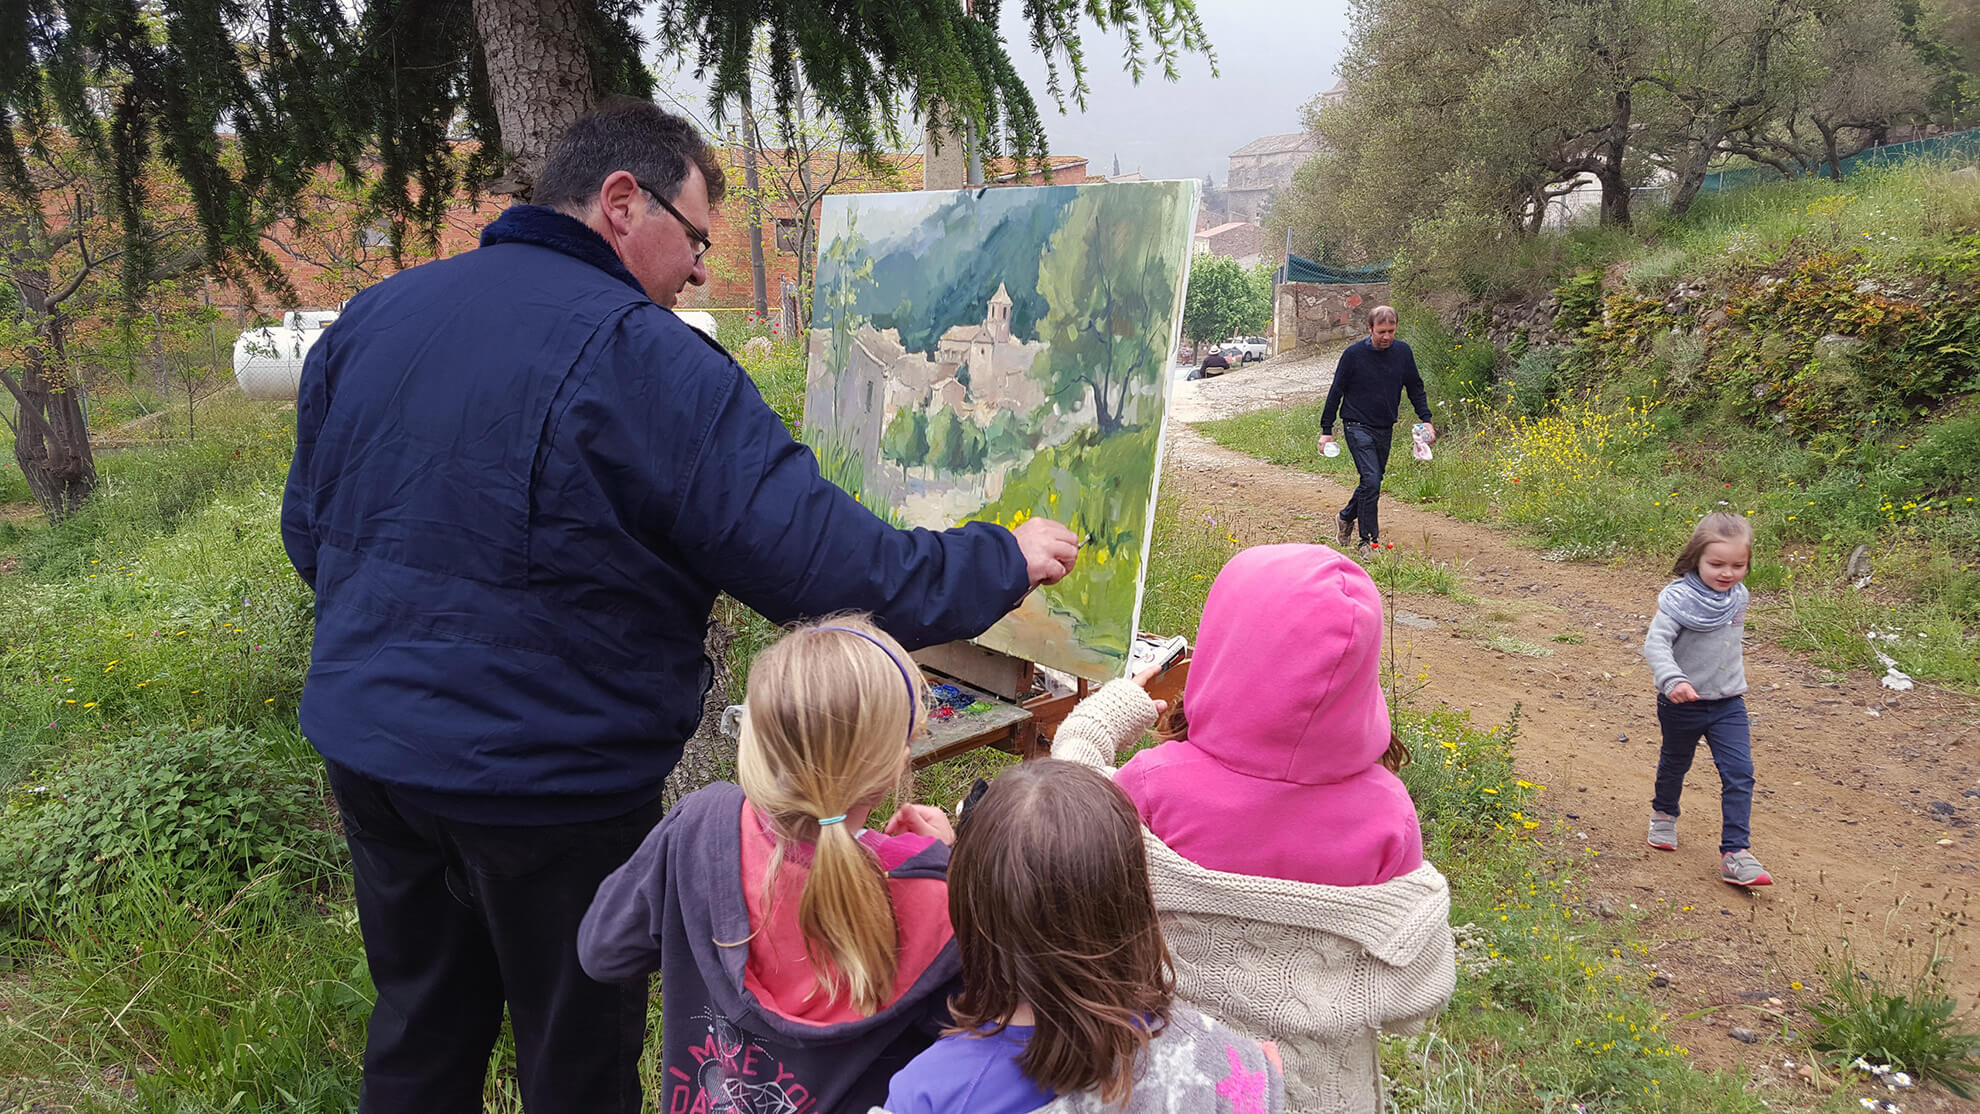 Outdoor quick painting contest at the Catalan village of L'Argentera